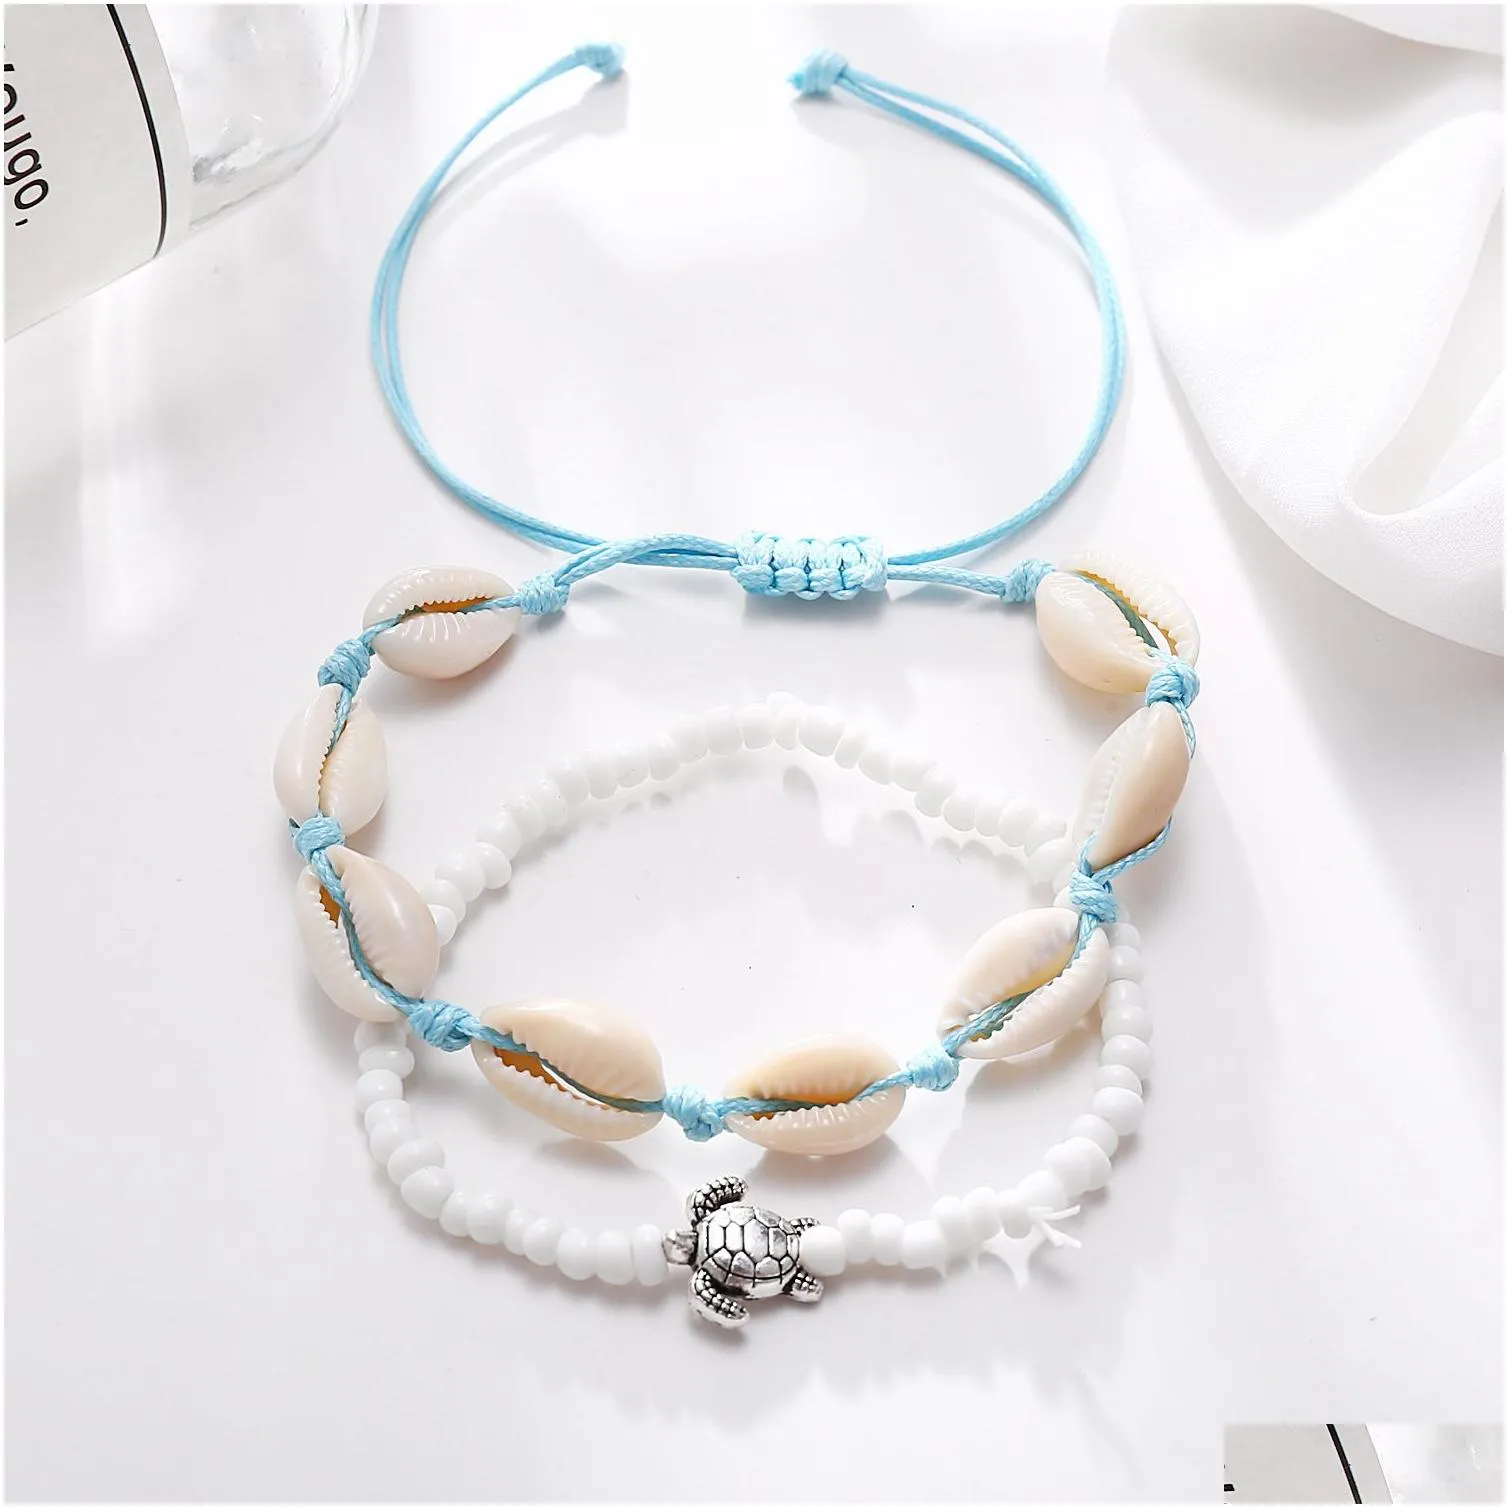 2pc/set bohemia summer jewelry turtle shell anklet fashion foot chain charm beads ankle bracelet for women